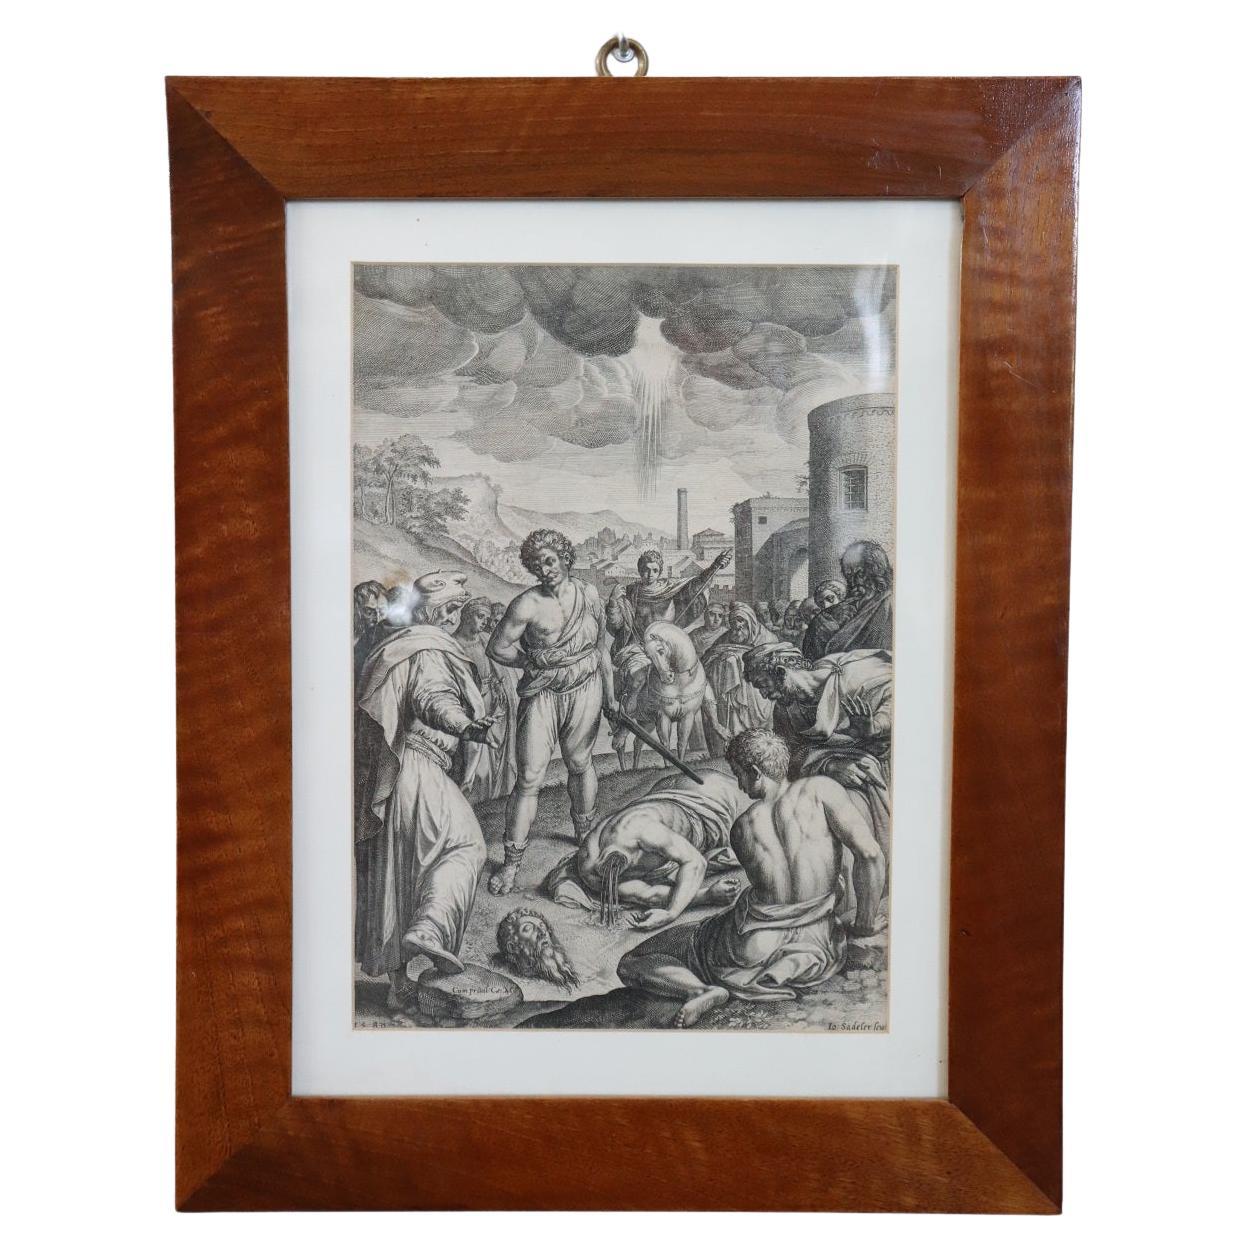 16th Century Antique Engraving by Sadeler Johann I "The beheading of St. Paul" For Sale